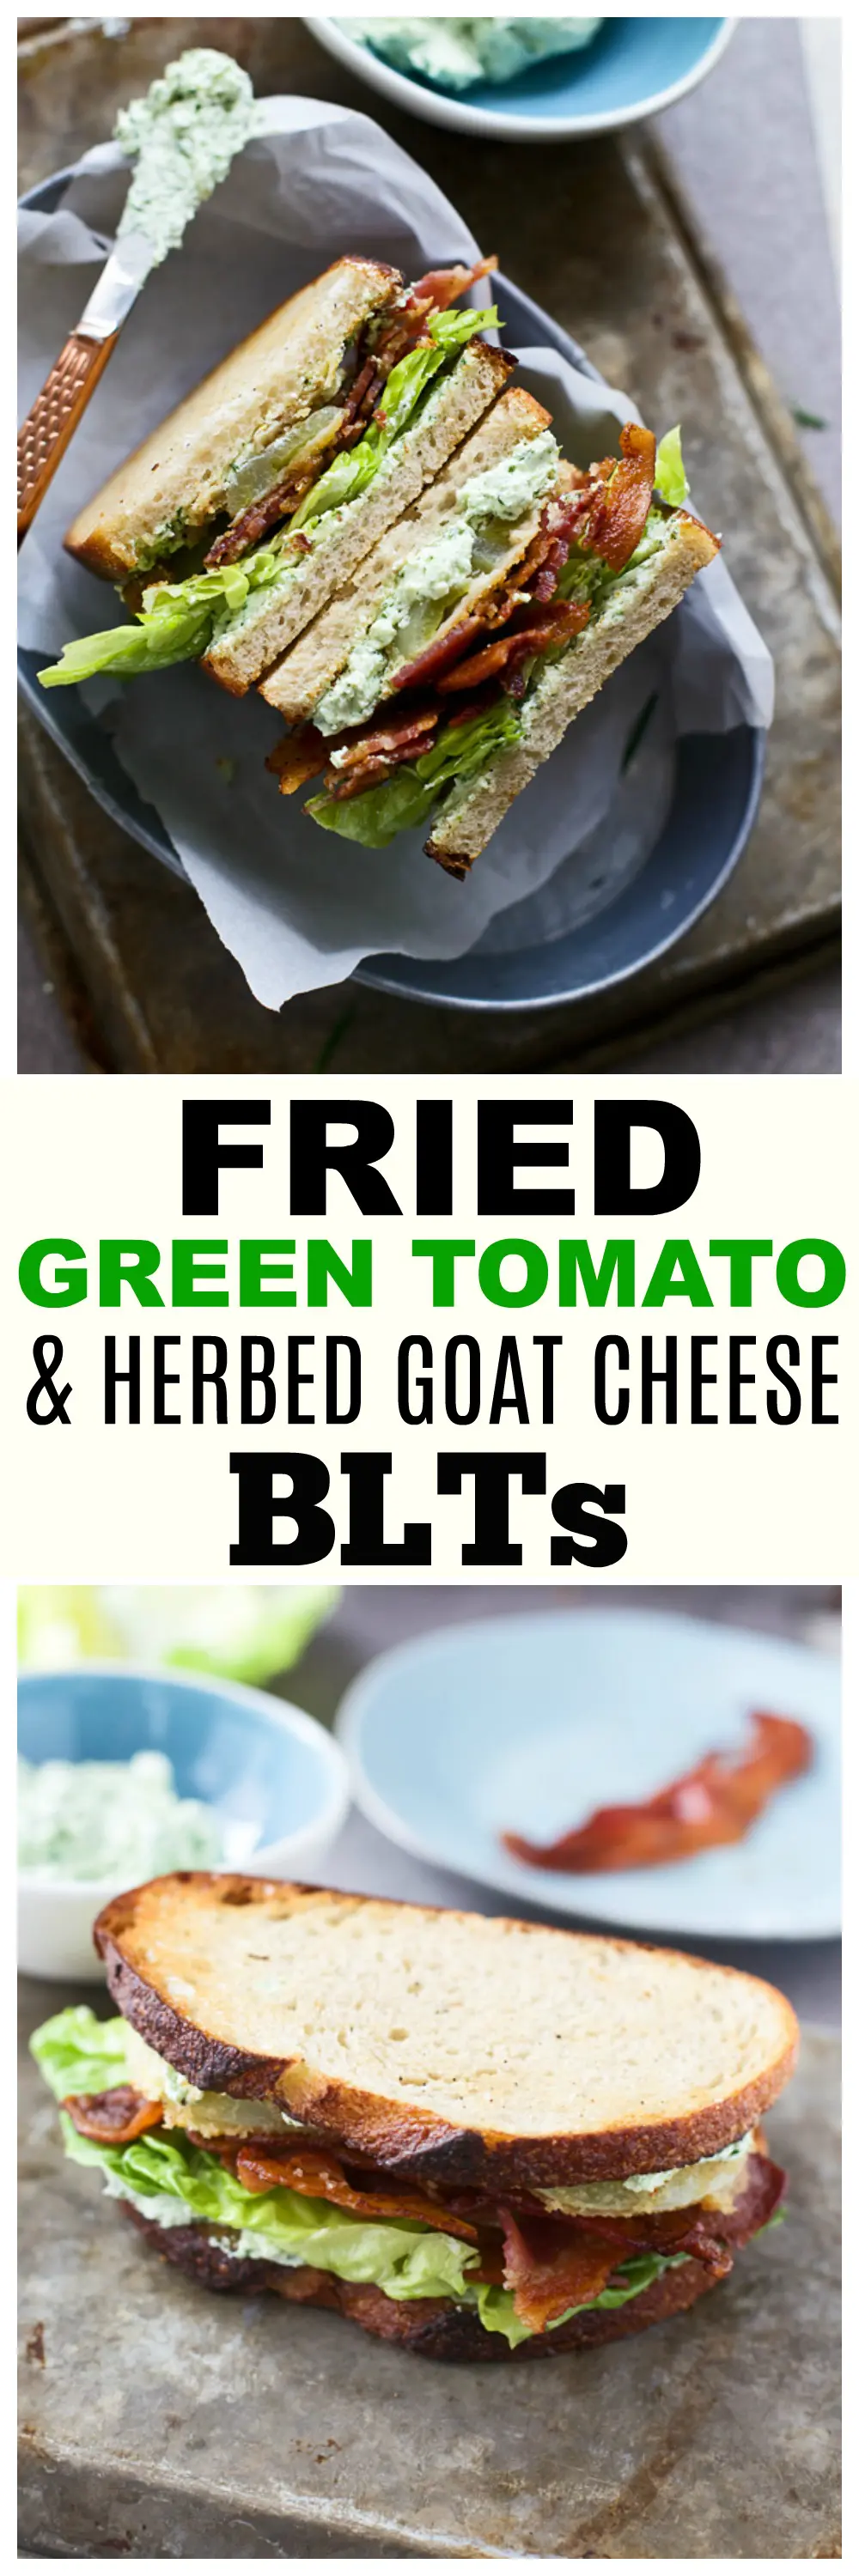 Fried Green Tomato & Goat Cheese BLT Sandwiches